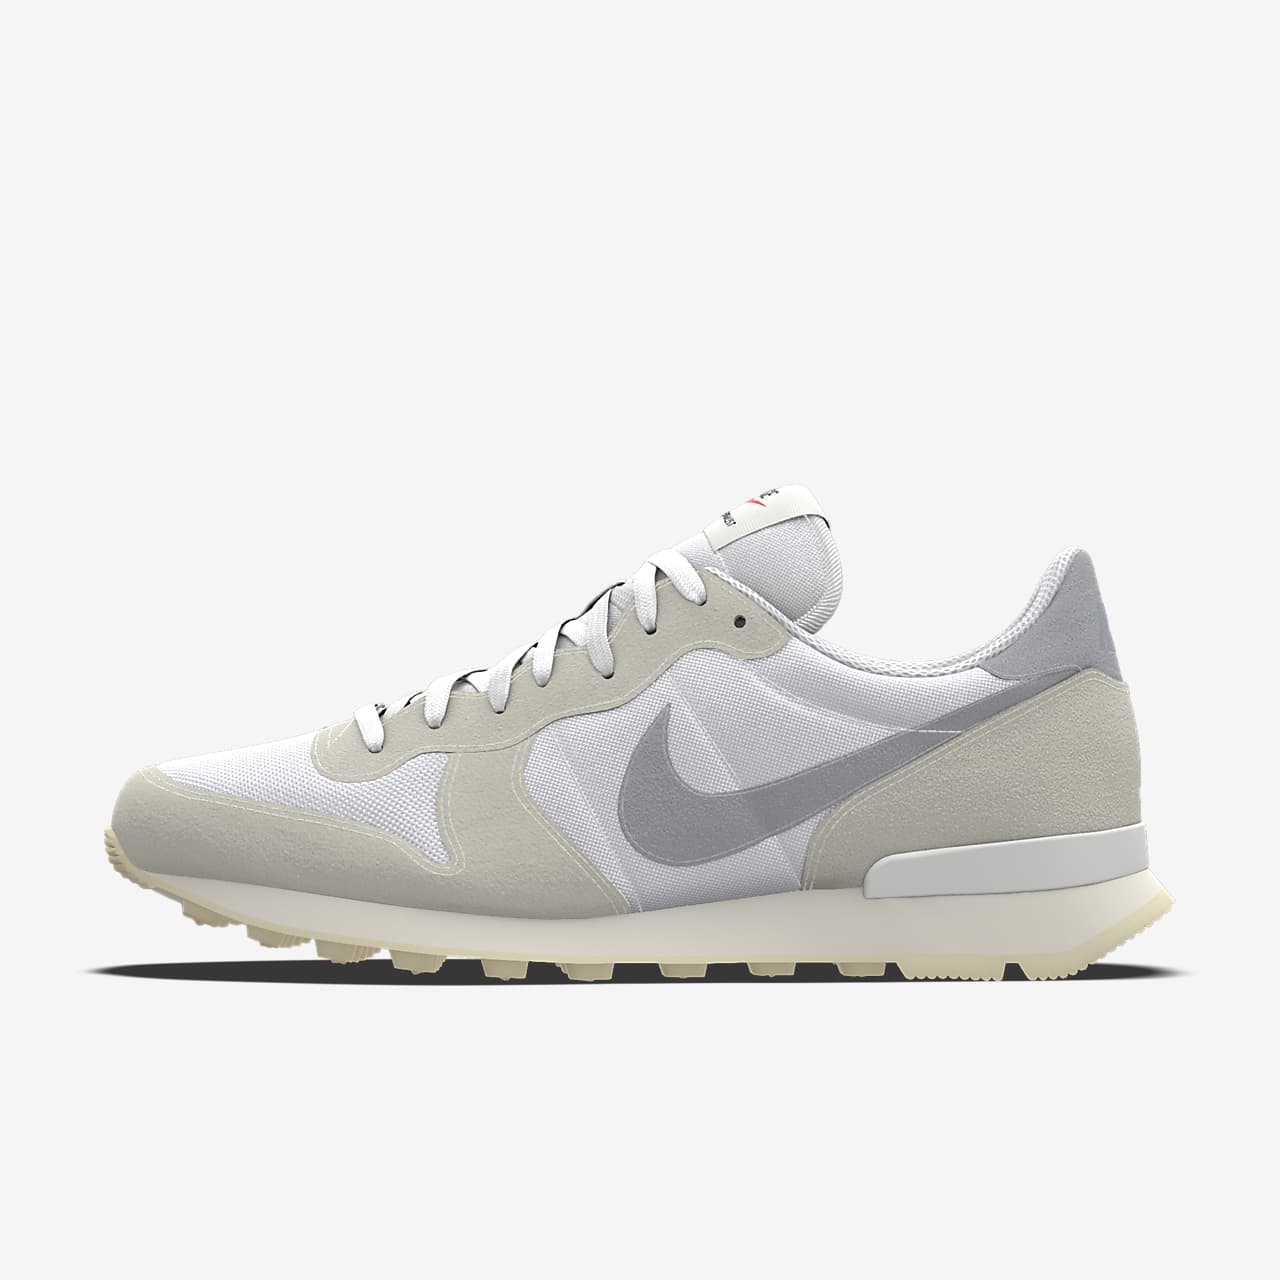 Chaussure personnalisable Nike Internationalist By You pour Femme